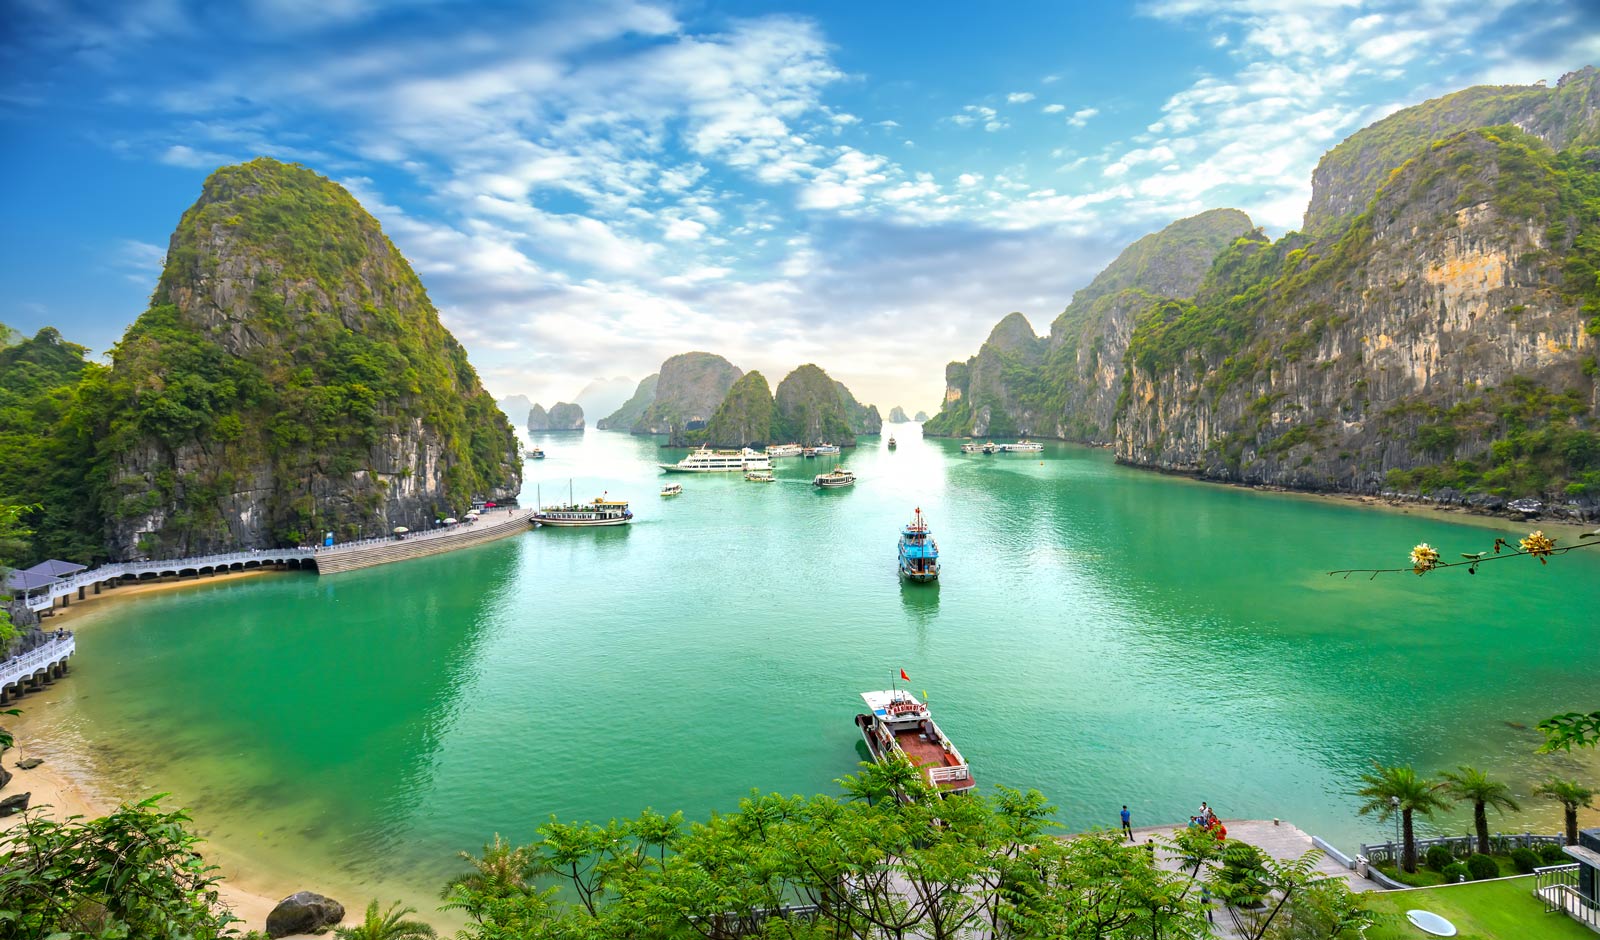 Best Things to do in Vietnam